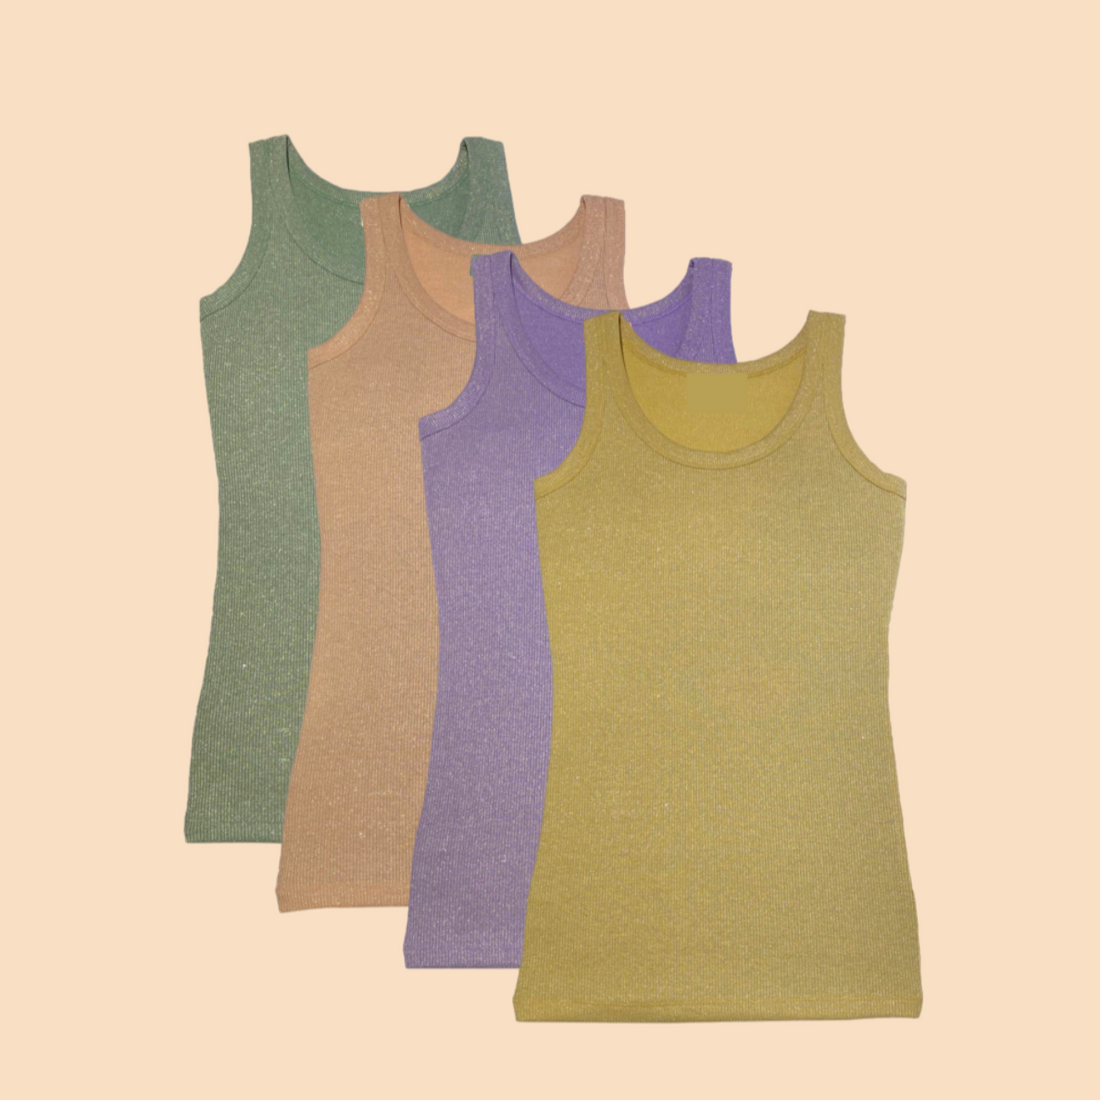 ESSENTIAL TANK TOP 4-PACK - ONLY $16.24 PER ITEM